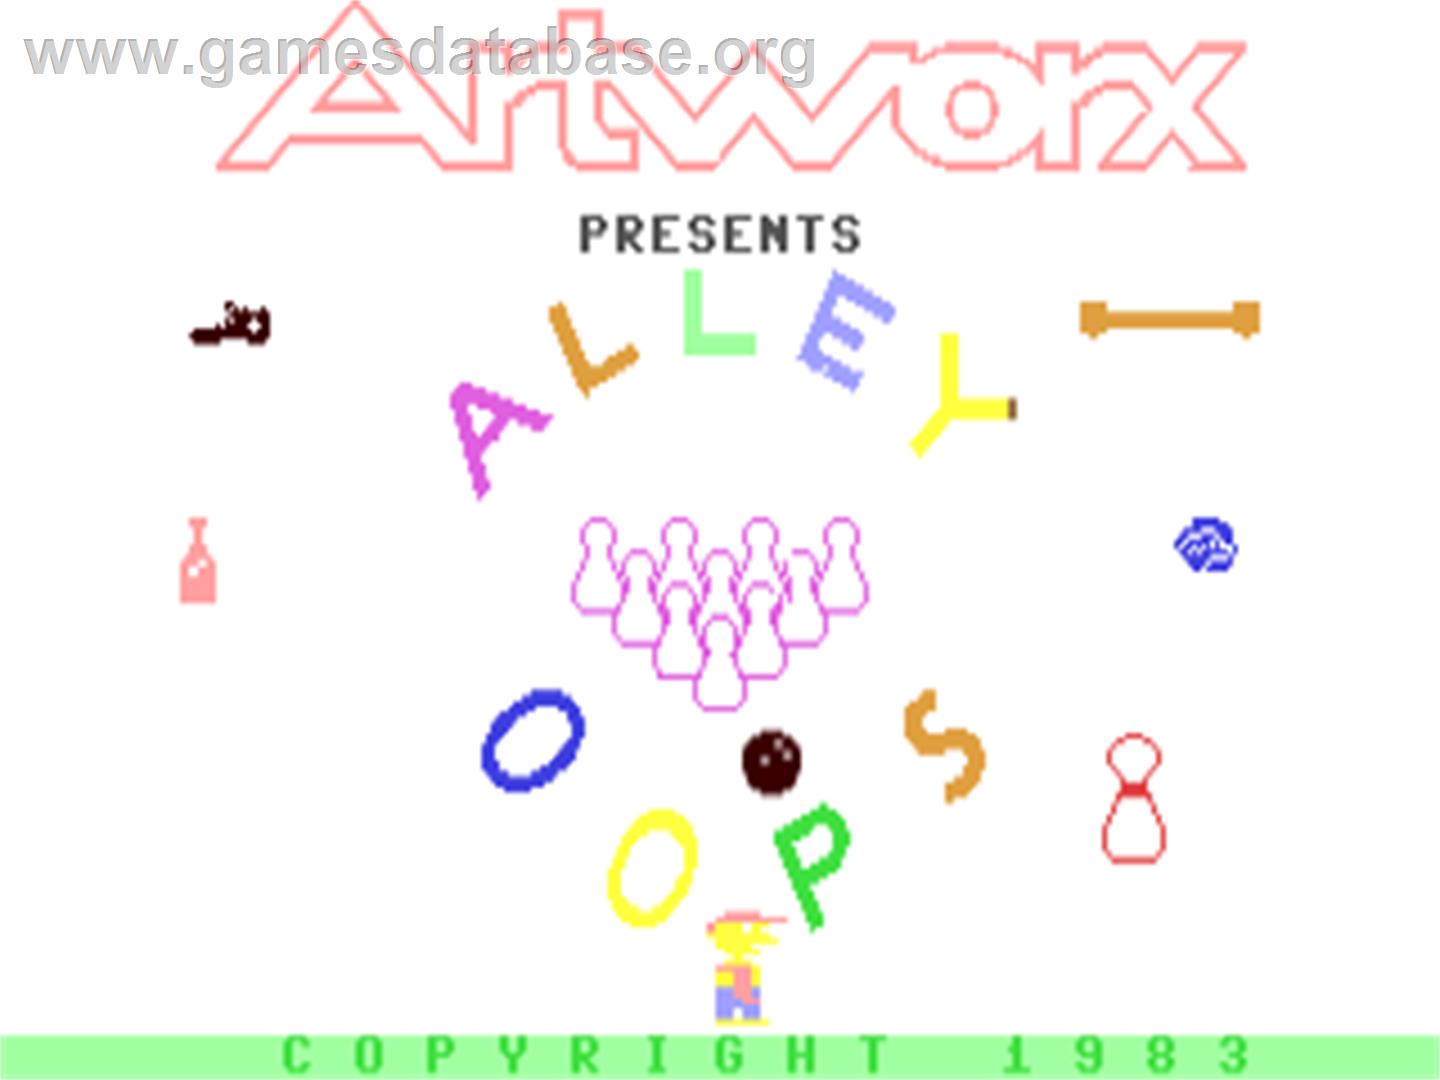 Alley Oops - Commodore 64 - Artwork - Title Screen